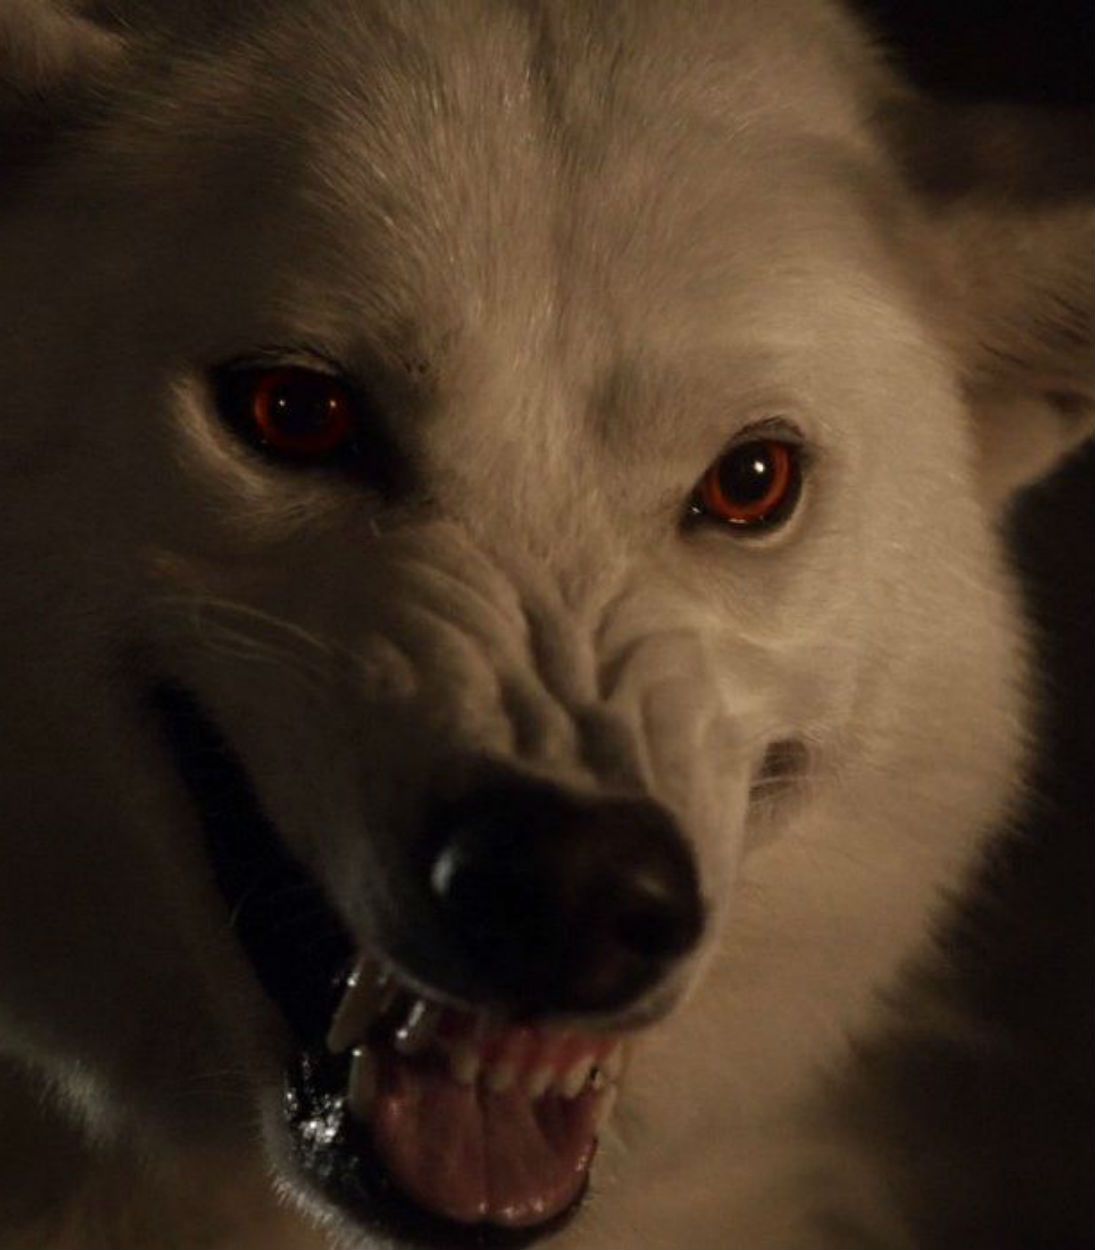 Ghost on Game of Thrones